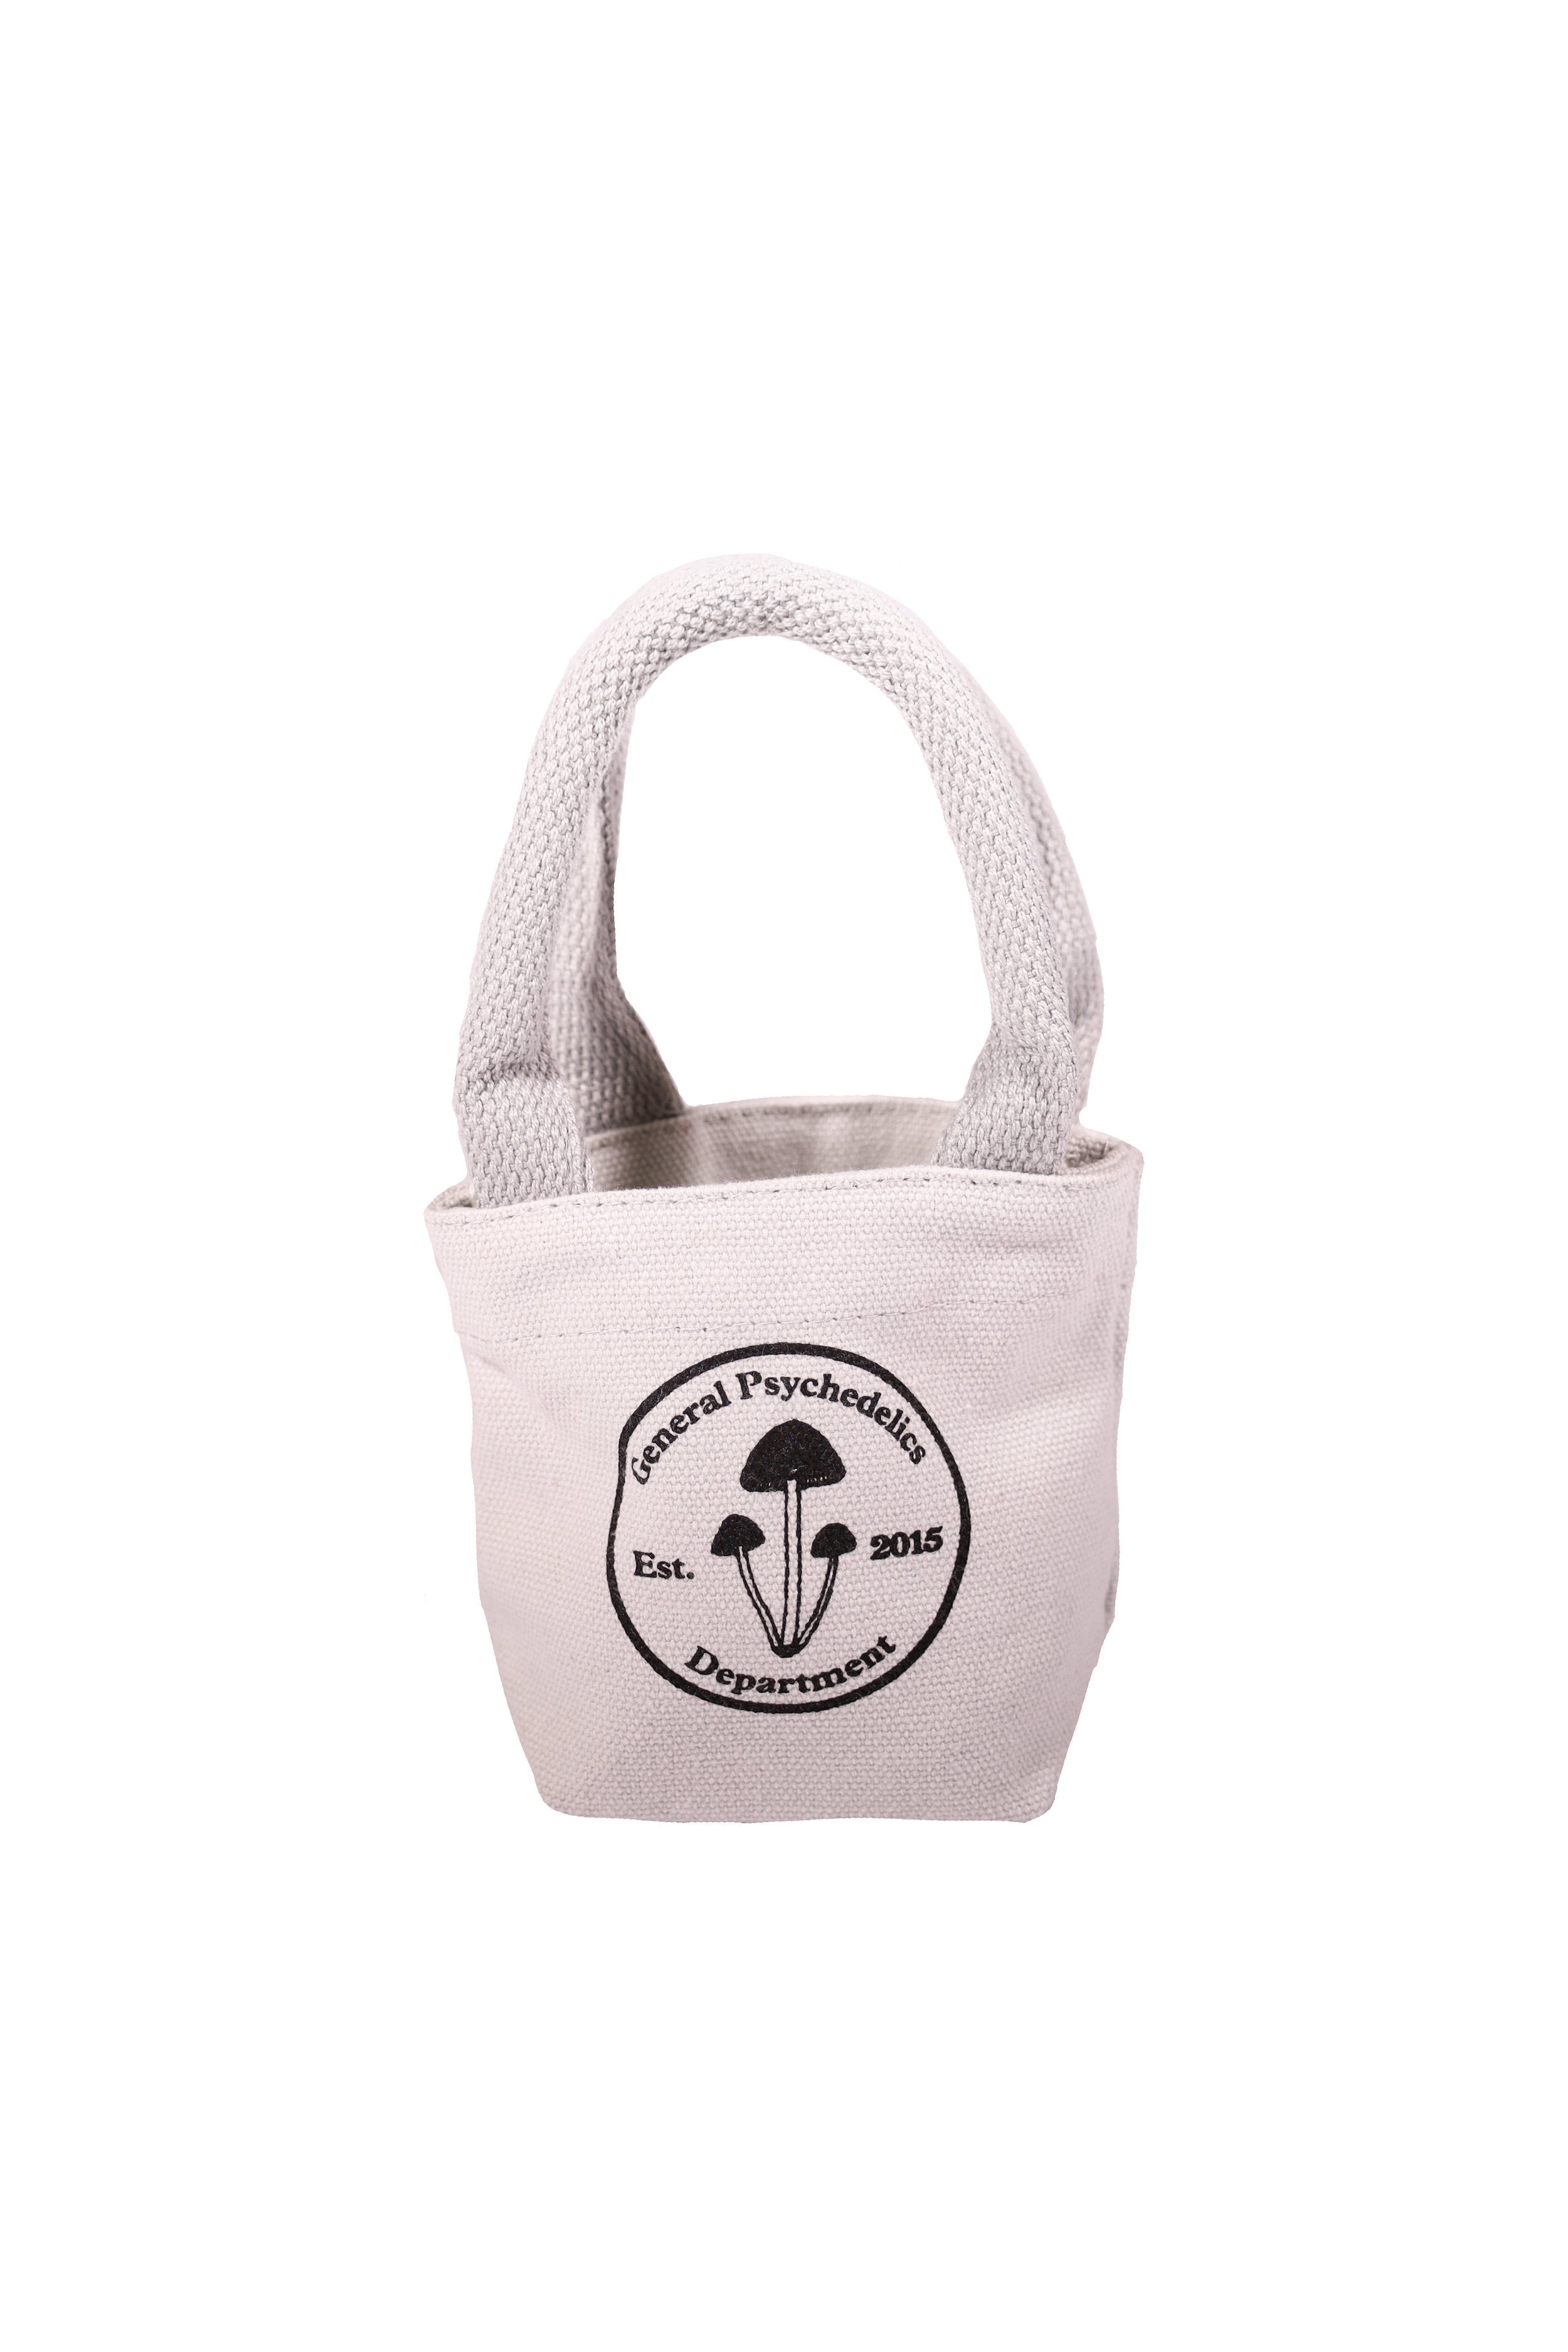 General Psychedelic Department Mini Tote - Grey-Mister Green-Mister Green